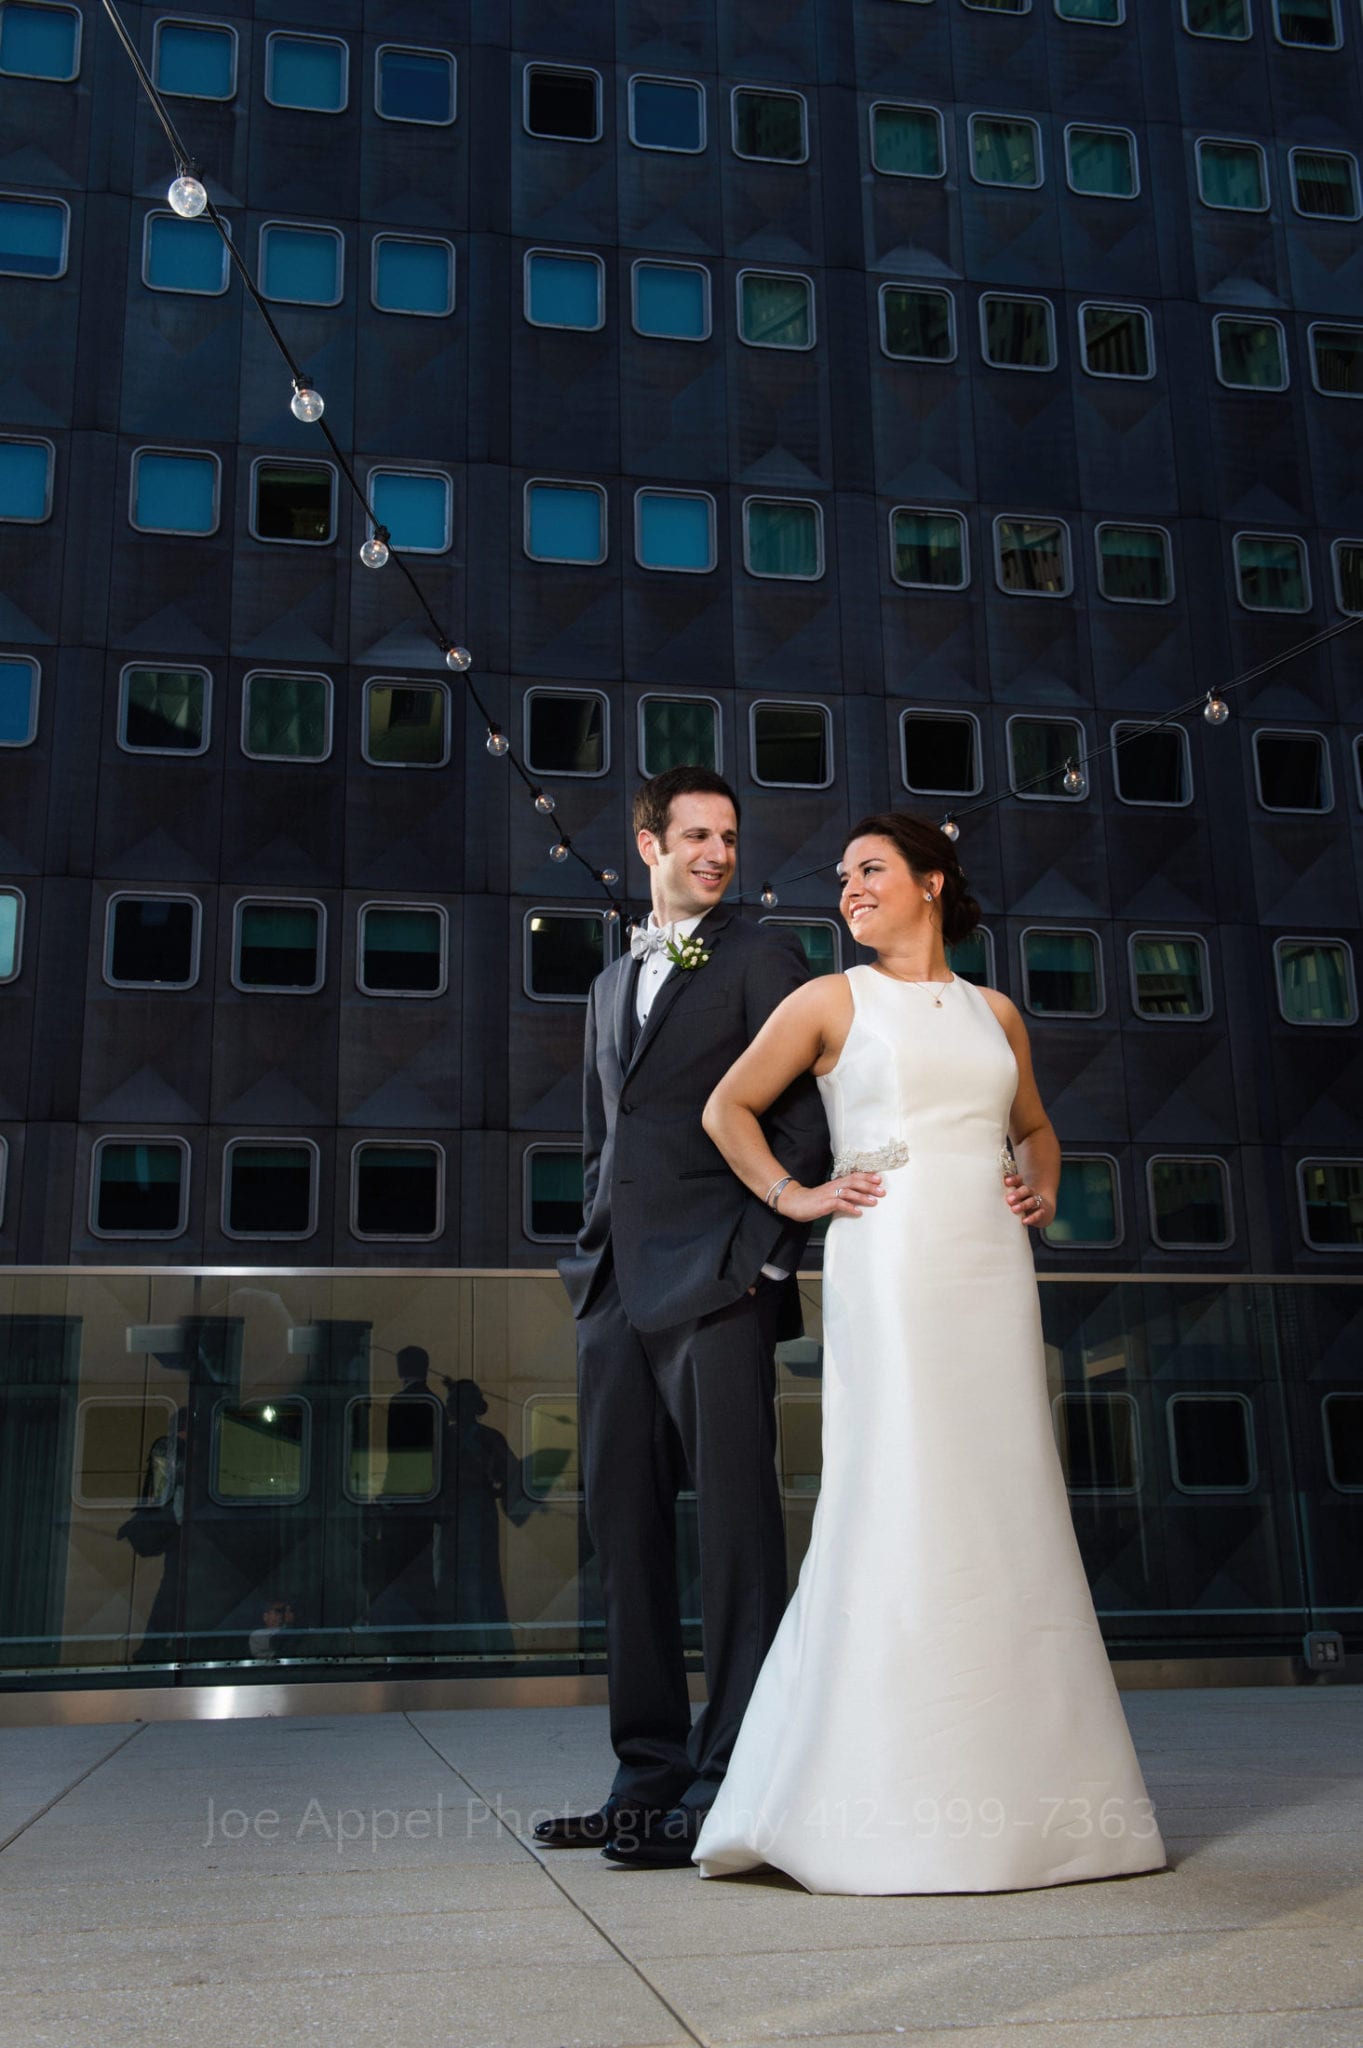 a bride and groom stand in front of a black building and strings of lights